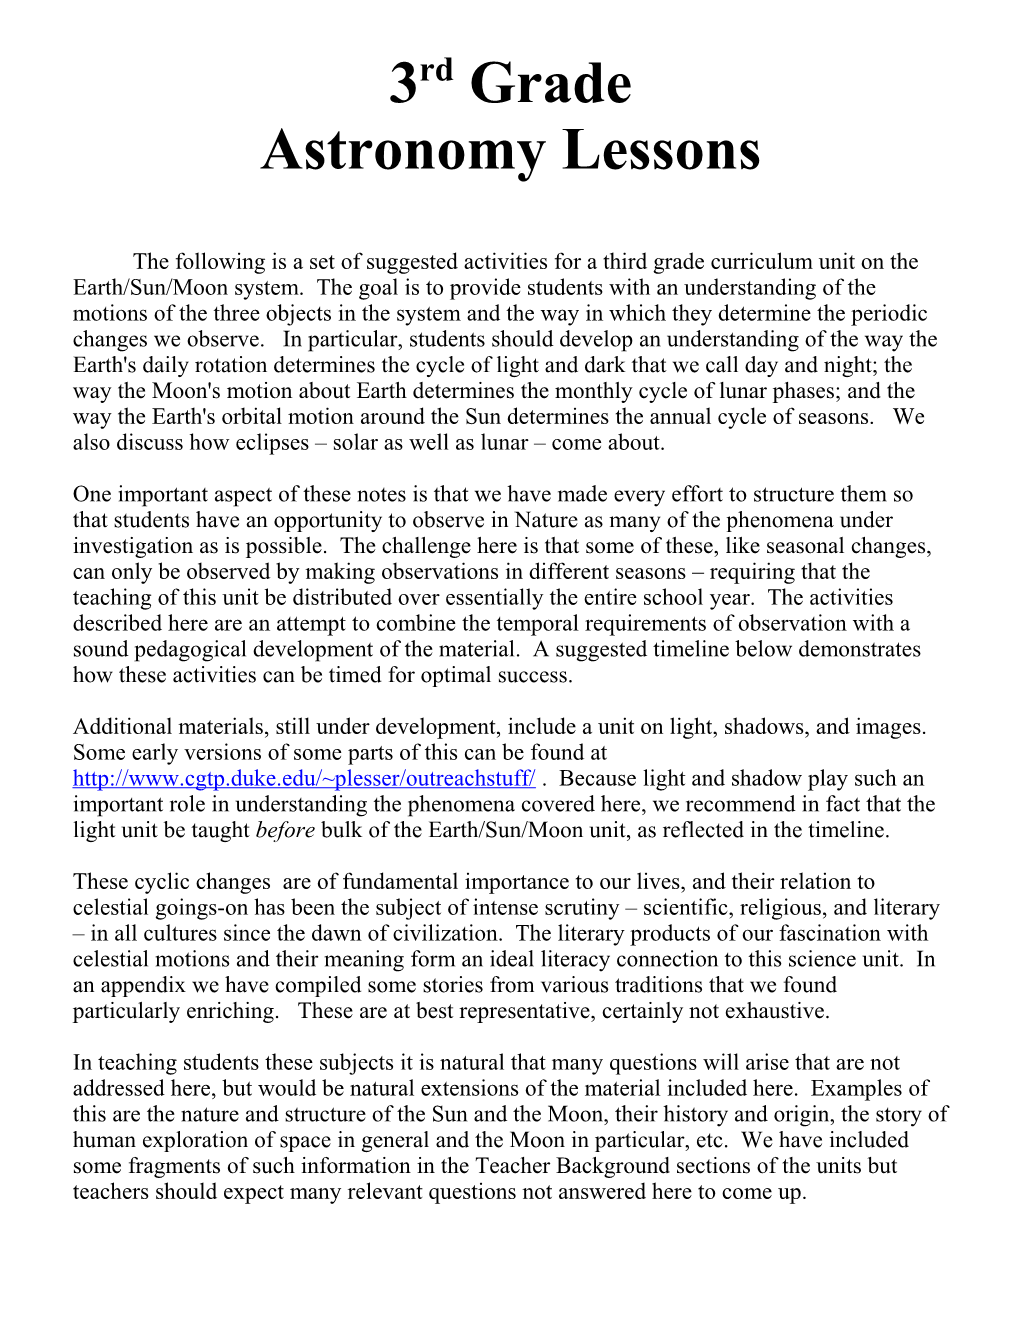 Astronomy Lessons